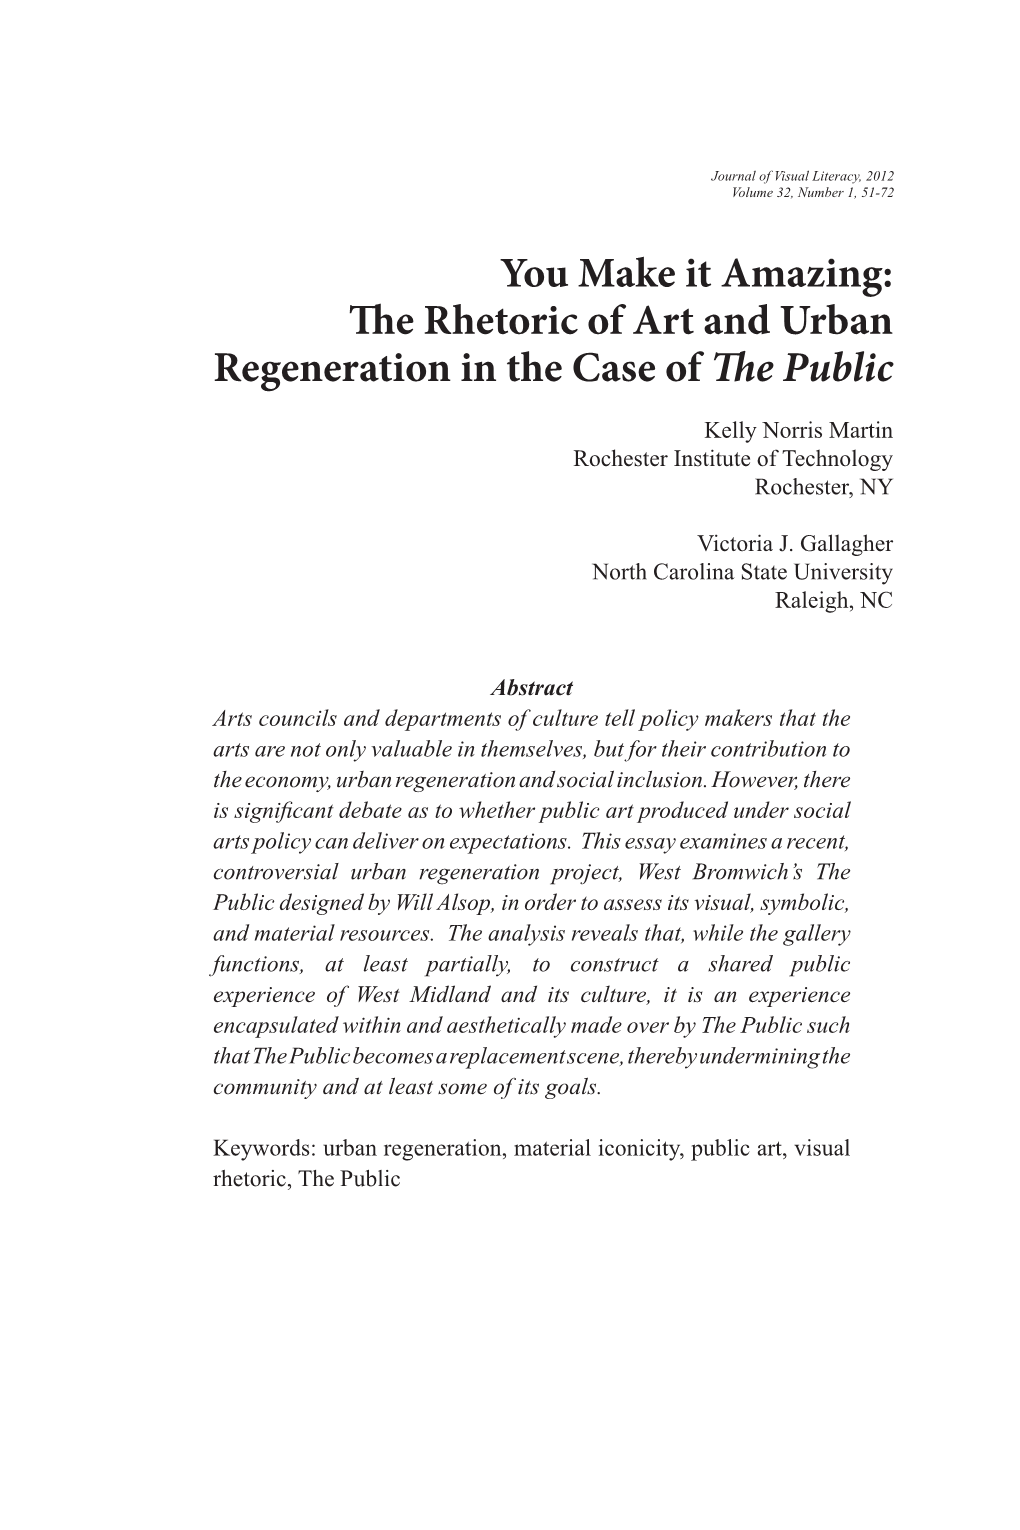 You Make It Amazing: the Rhetoric of Art and Urban Regeneration in the Case of the Public